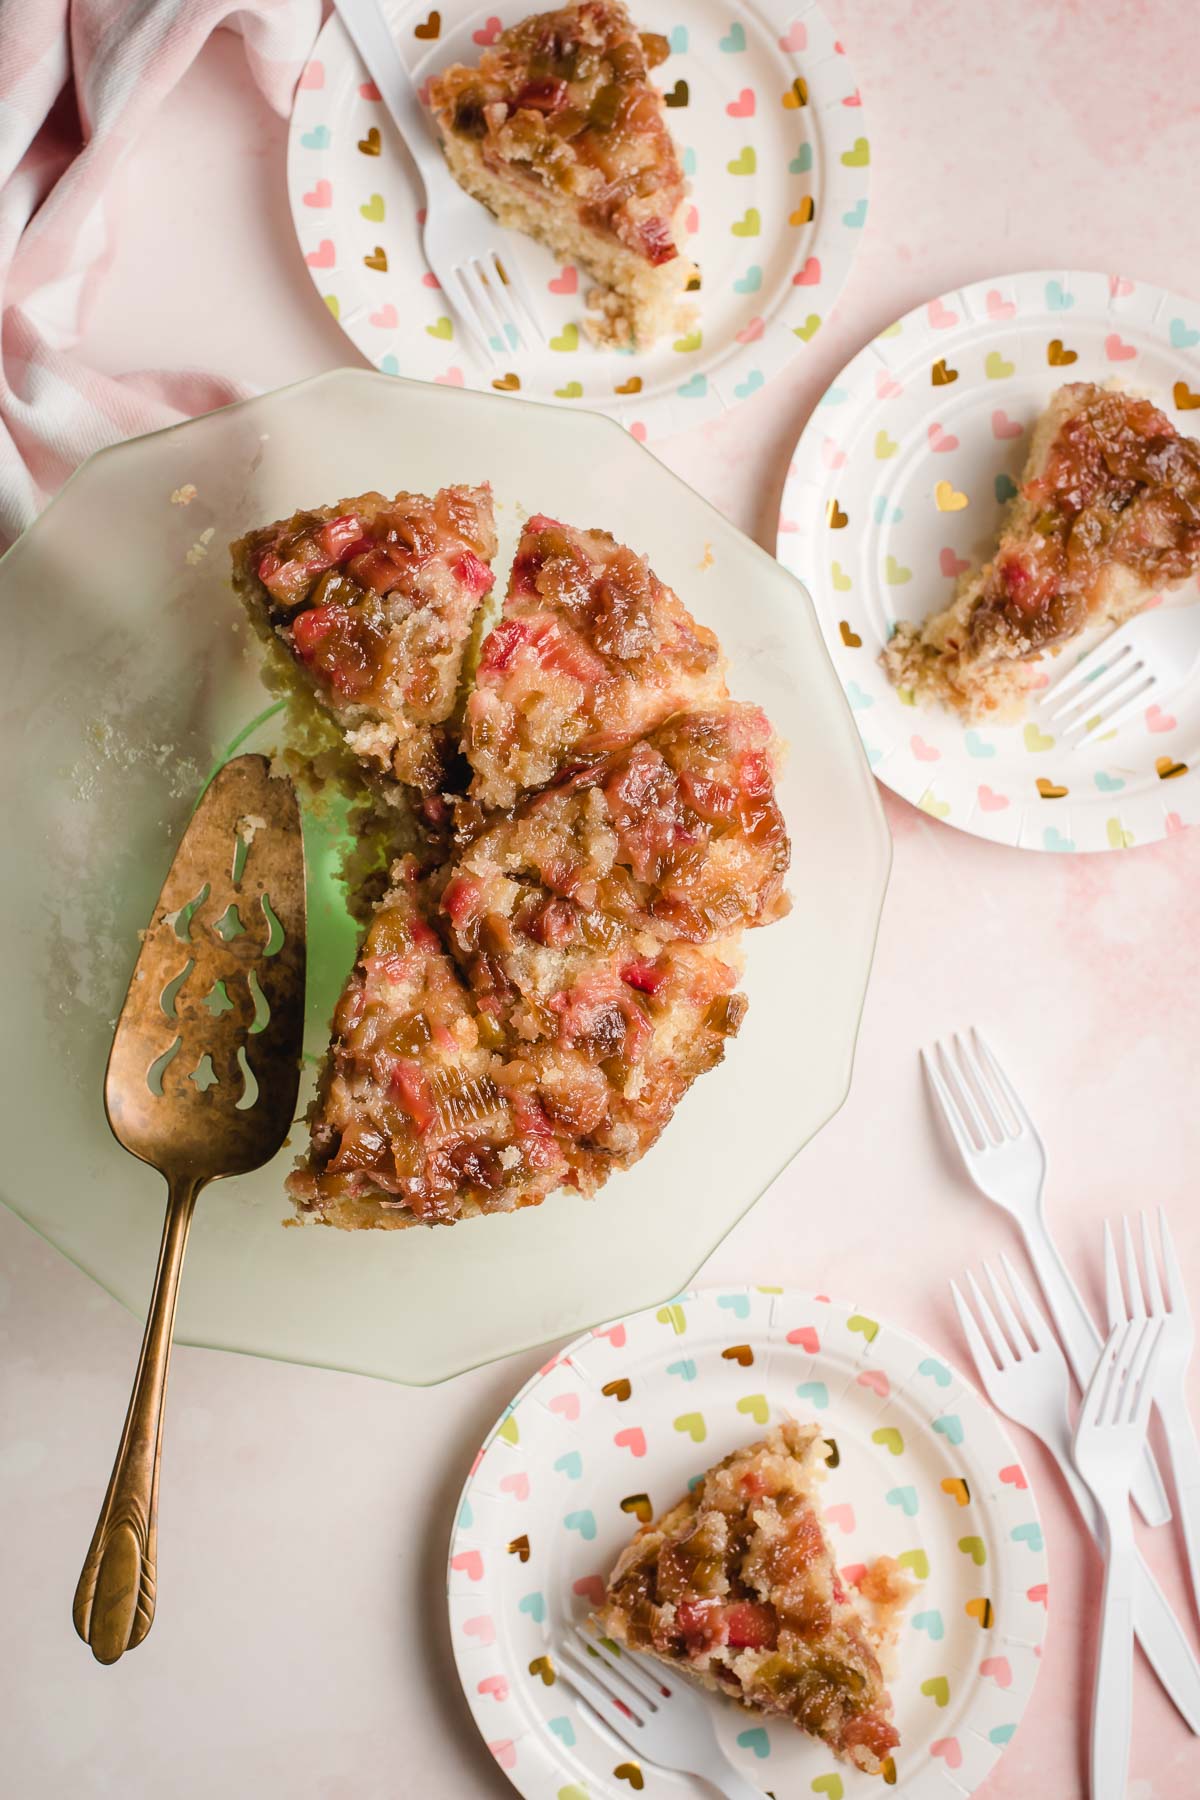 Rhubarb upside down cake on a pale green platter with a vintage gold cake server.